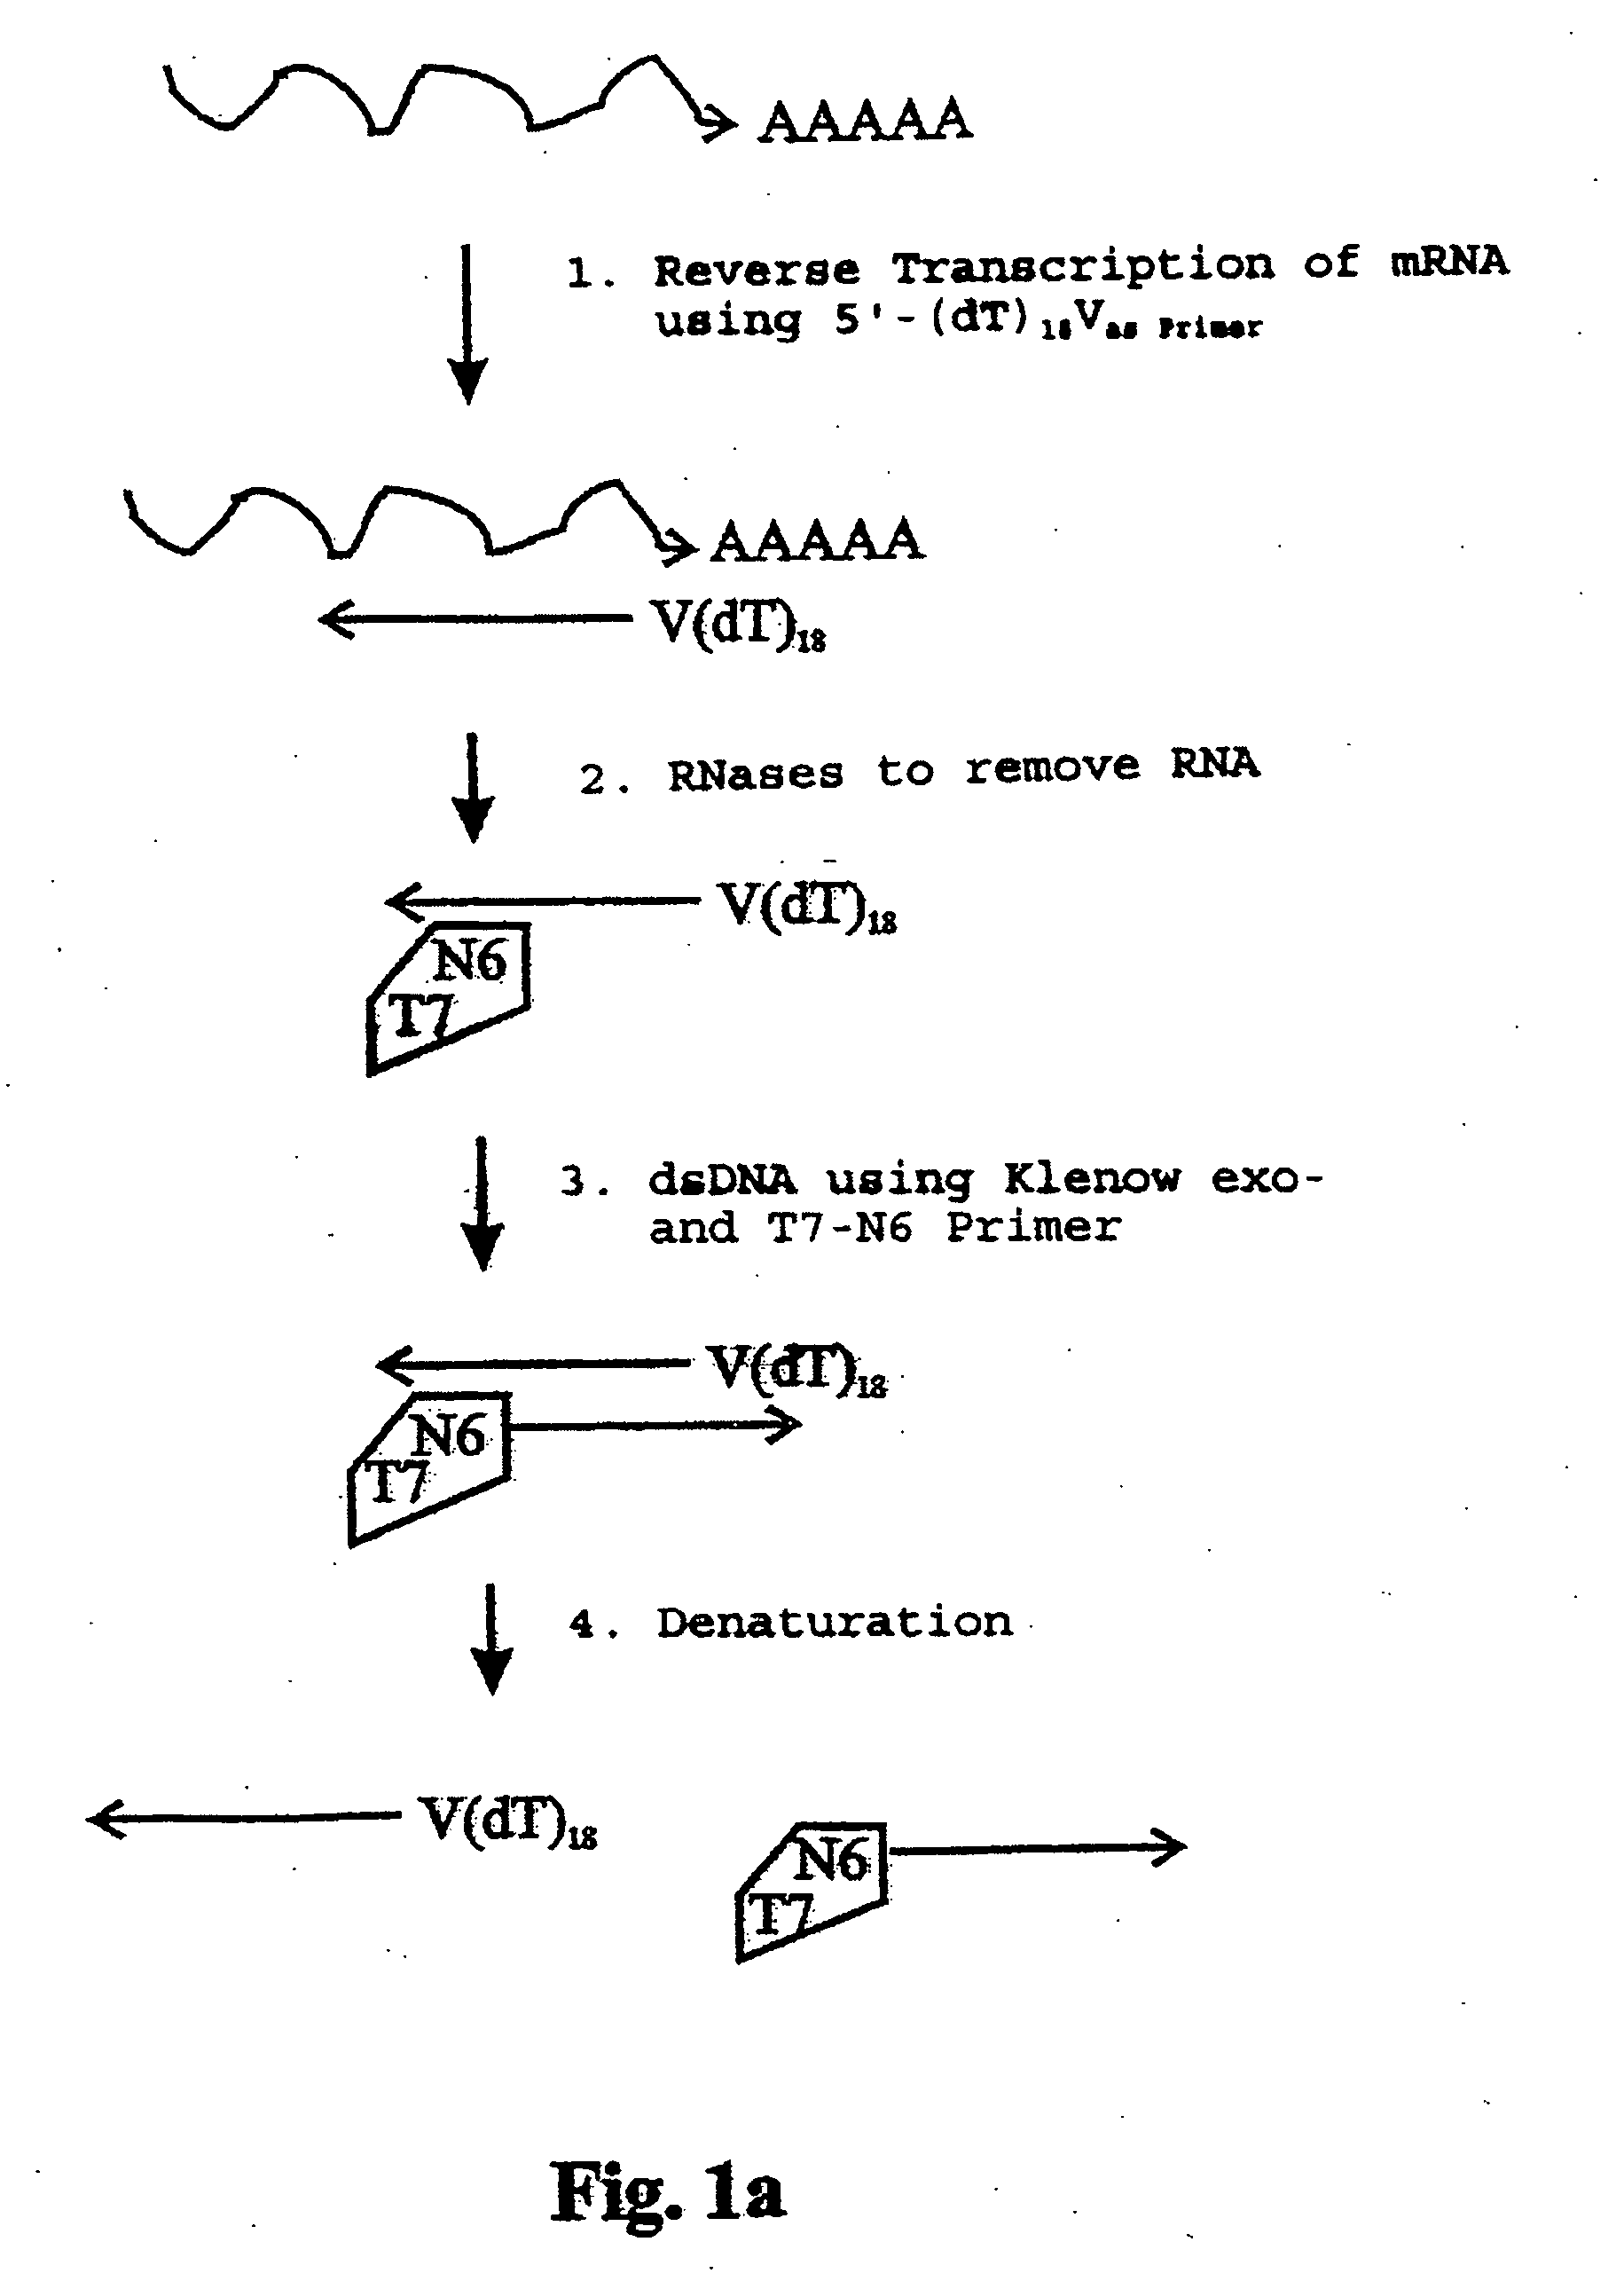 Reproduction of ribonucleic acids